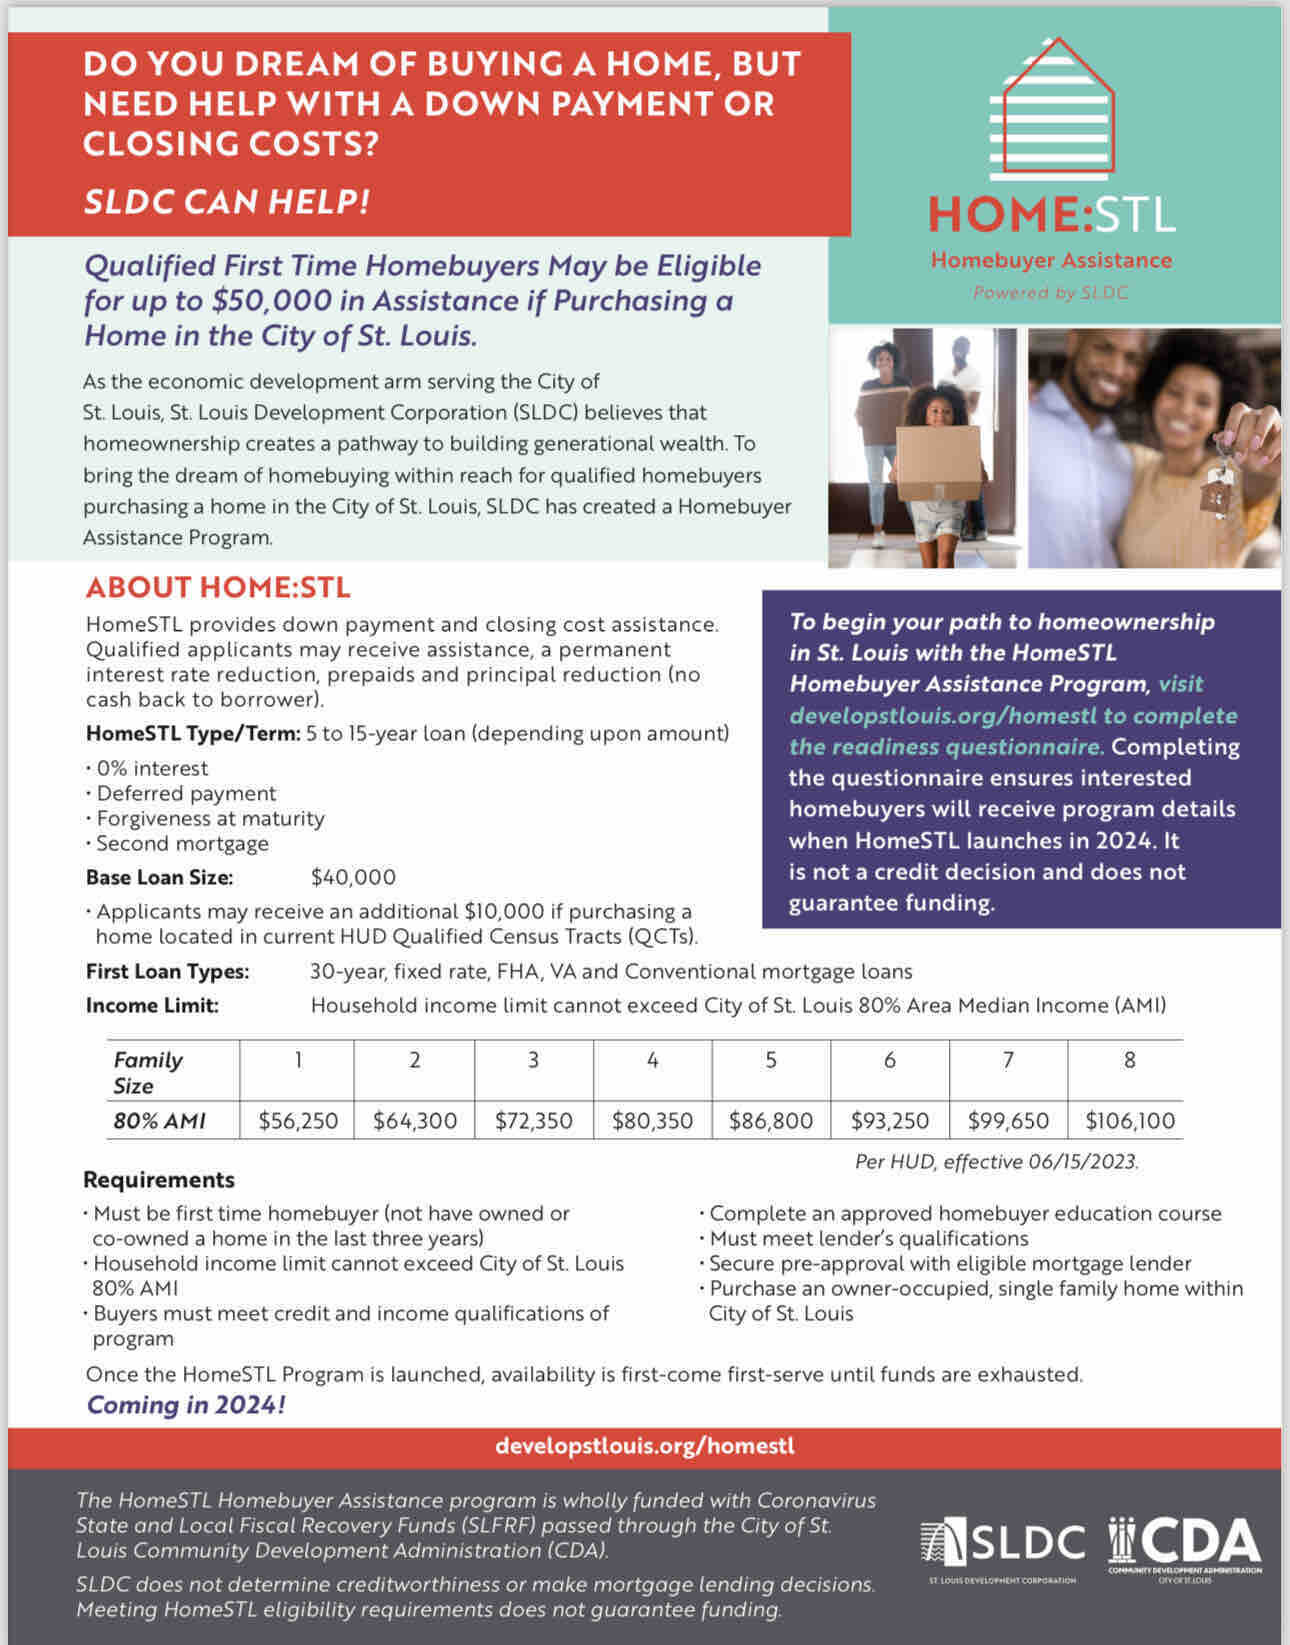 SLDC is recruiting mortgage lenders for its HomeSTL Homebuyer Assistance Program, which will make up to $50Kavailable for credit qualified 1st time buyers in the City. 

Learn more about the program and download the lender application: https://www.de